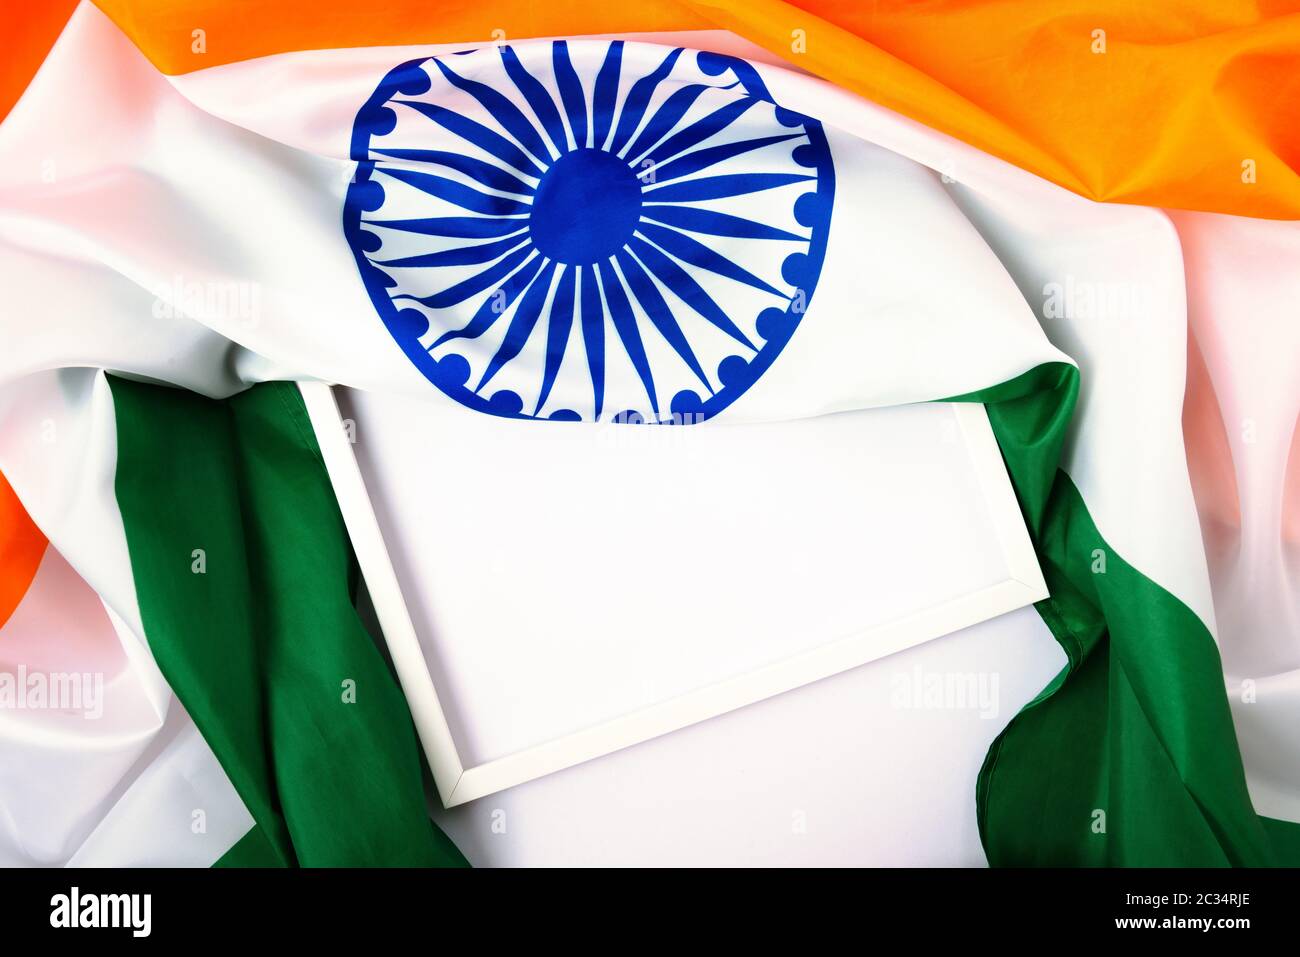 Vector Illustration Of Indian Tricolor Flag Background Stock Illustration -  Download Image Now - iStock